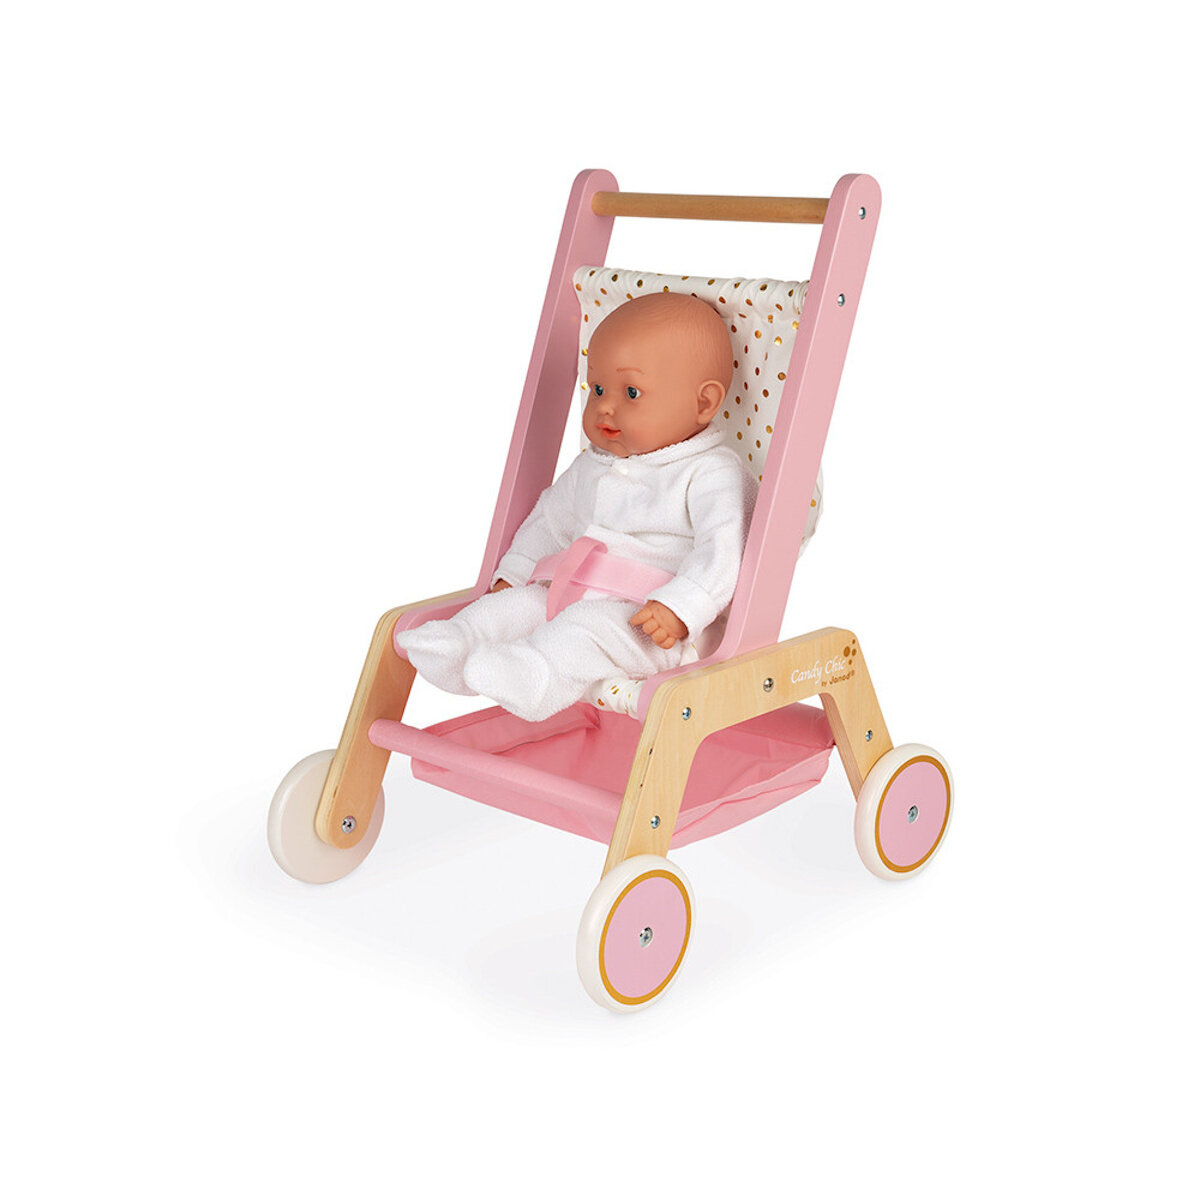 Janod Holz Puppenwagen Candy Chic, 39,99 €